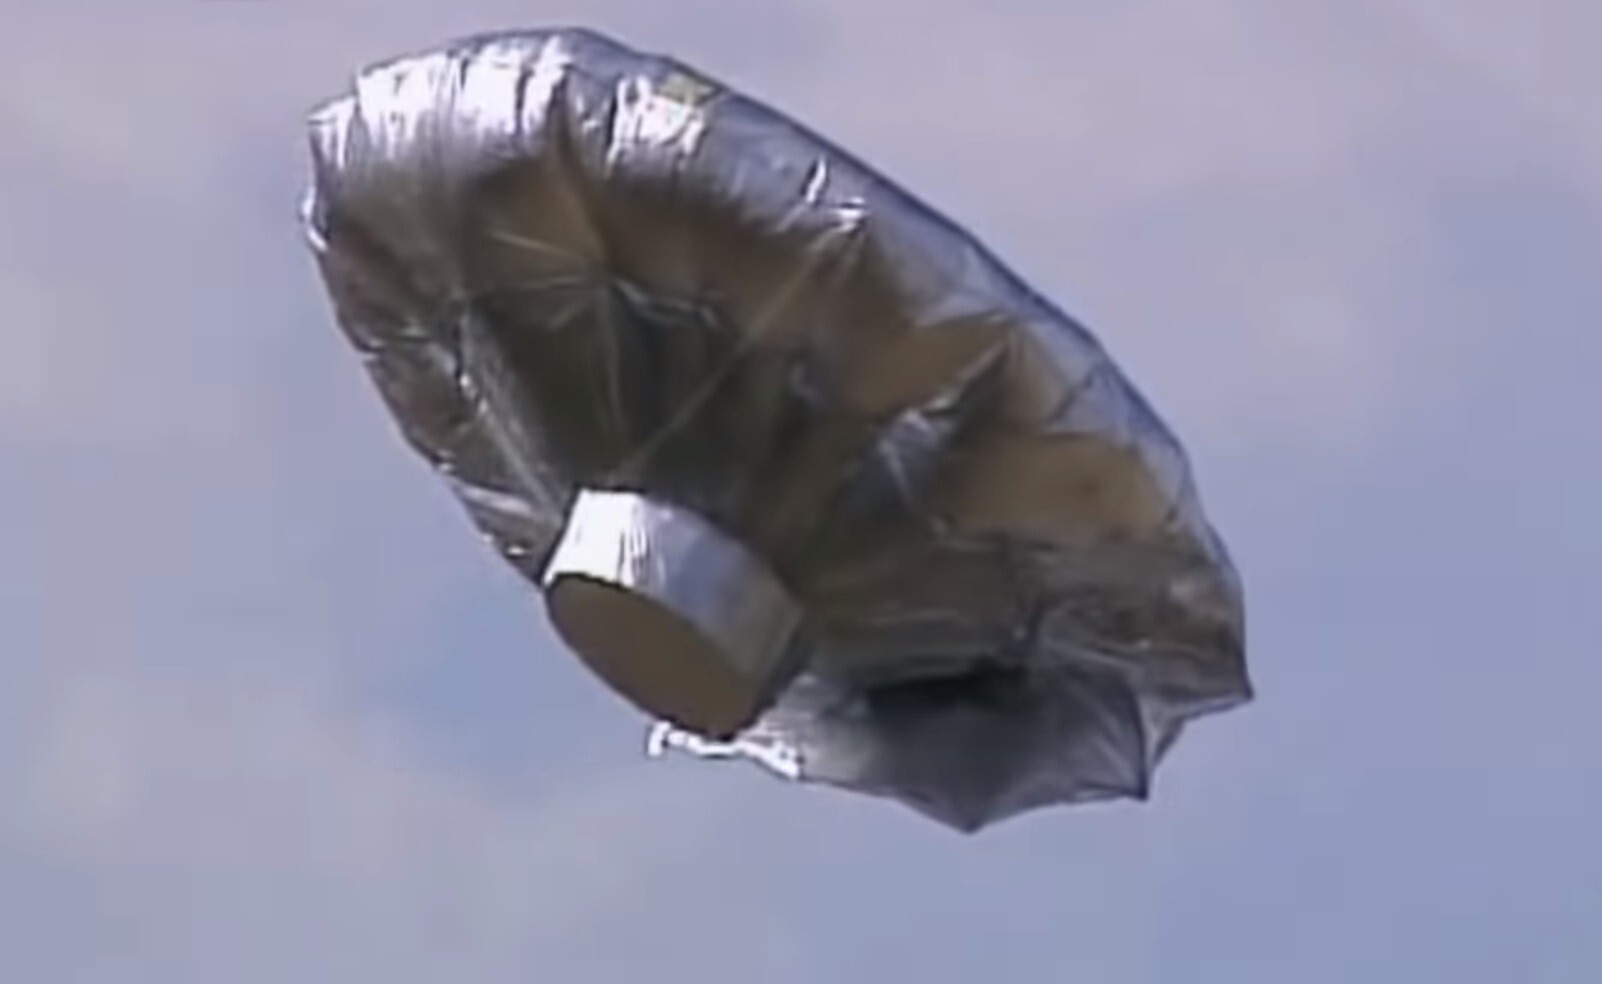 The balloon eventually landed and was found to be empty. Photo: YouTube